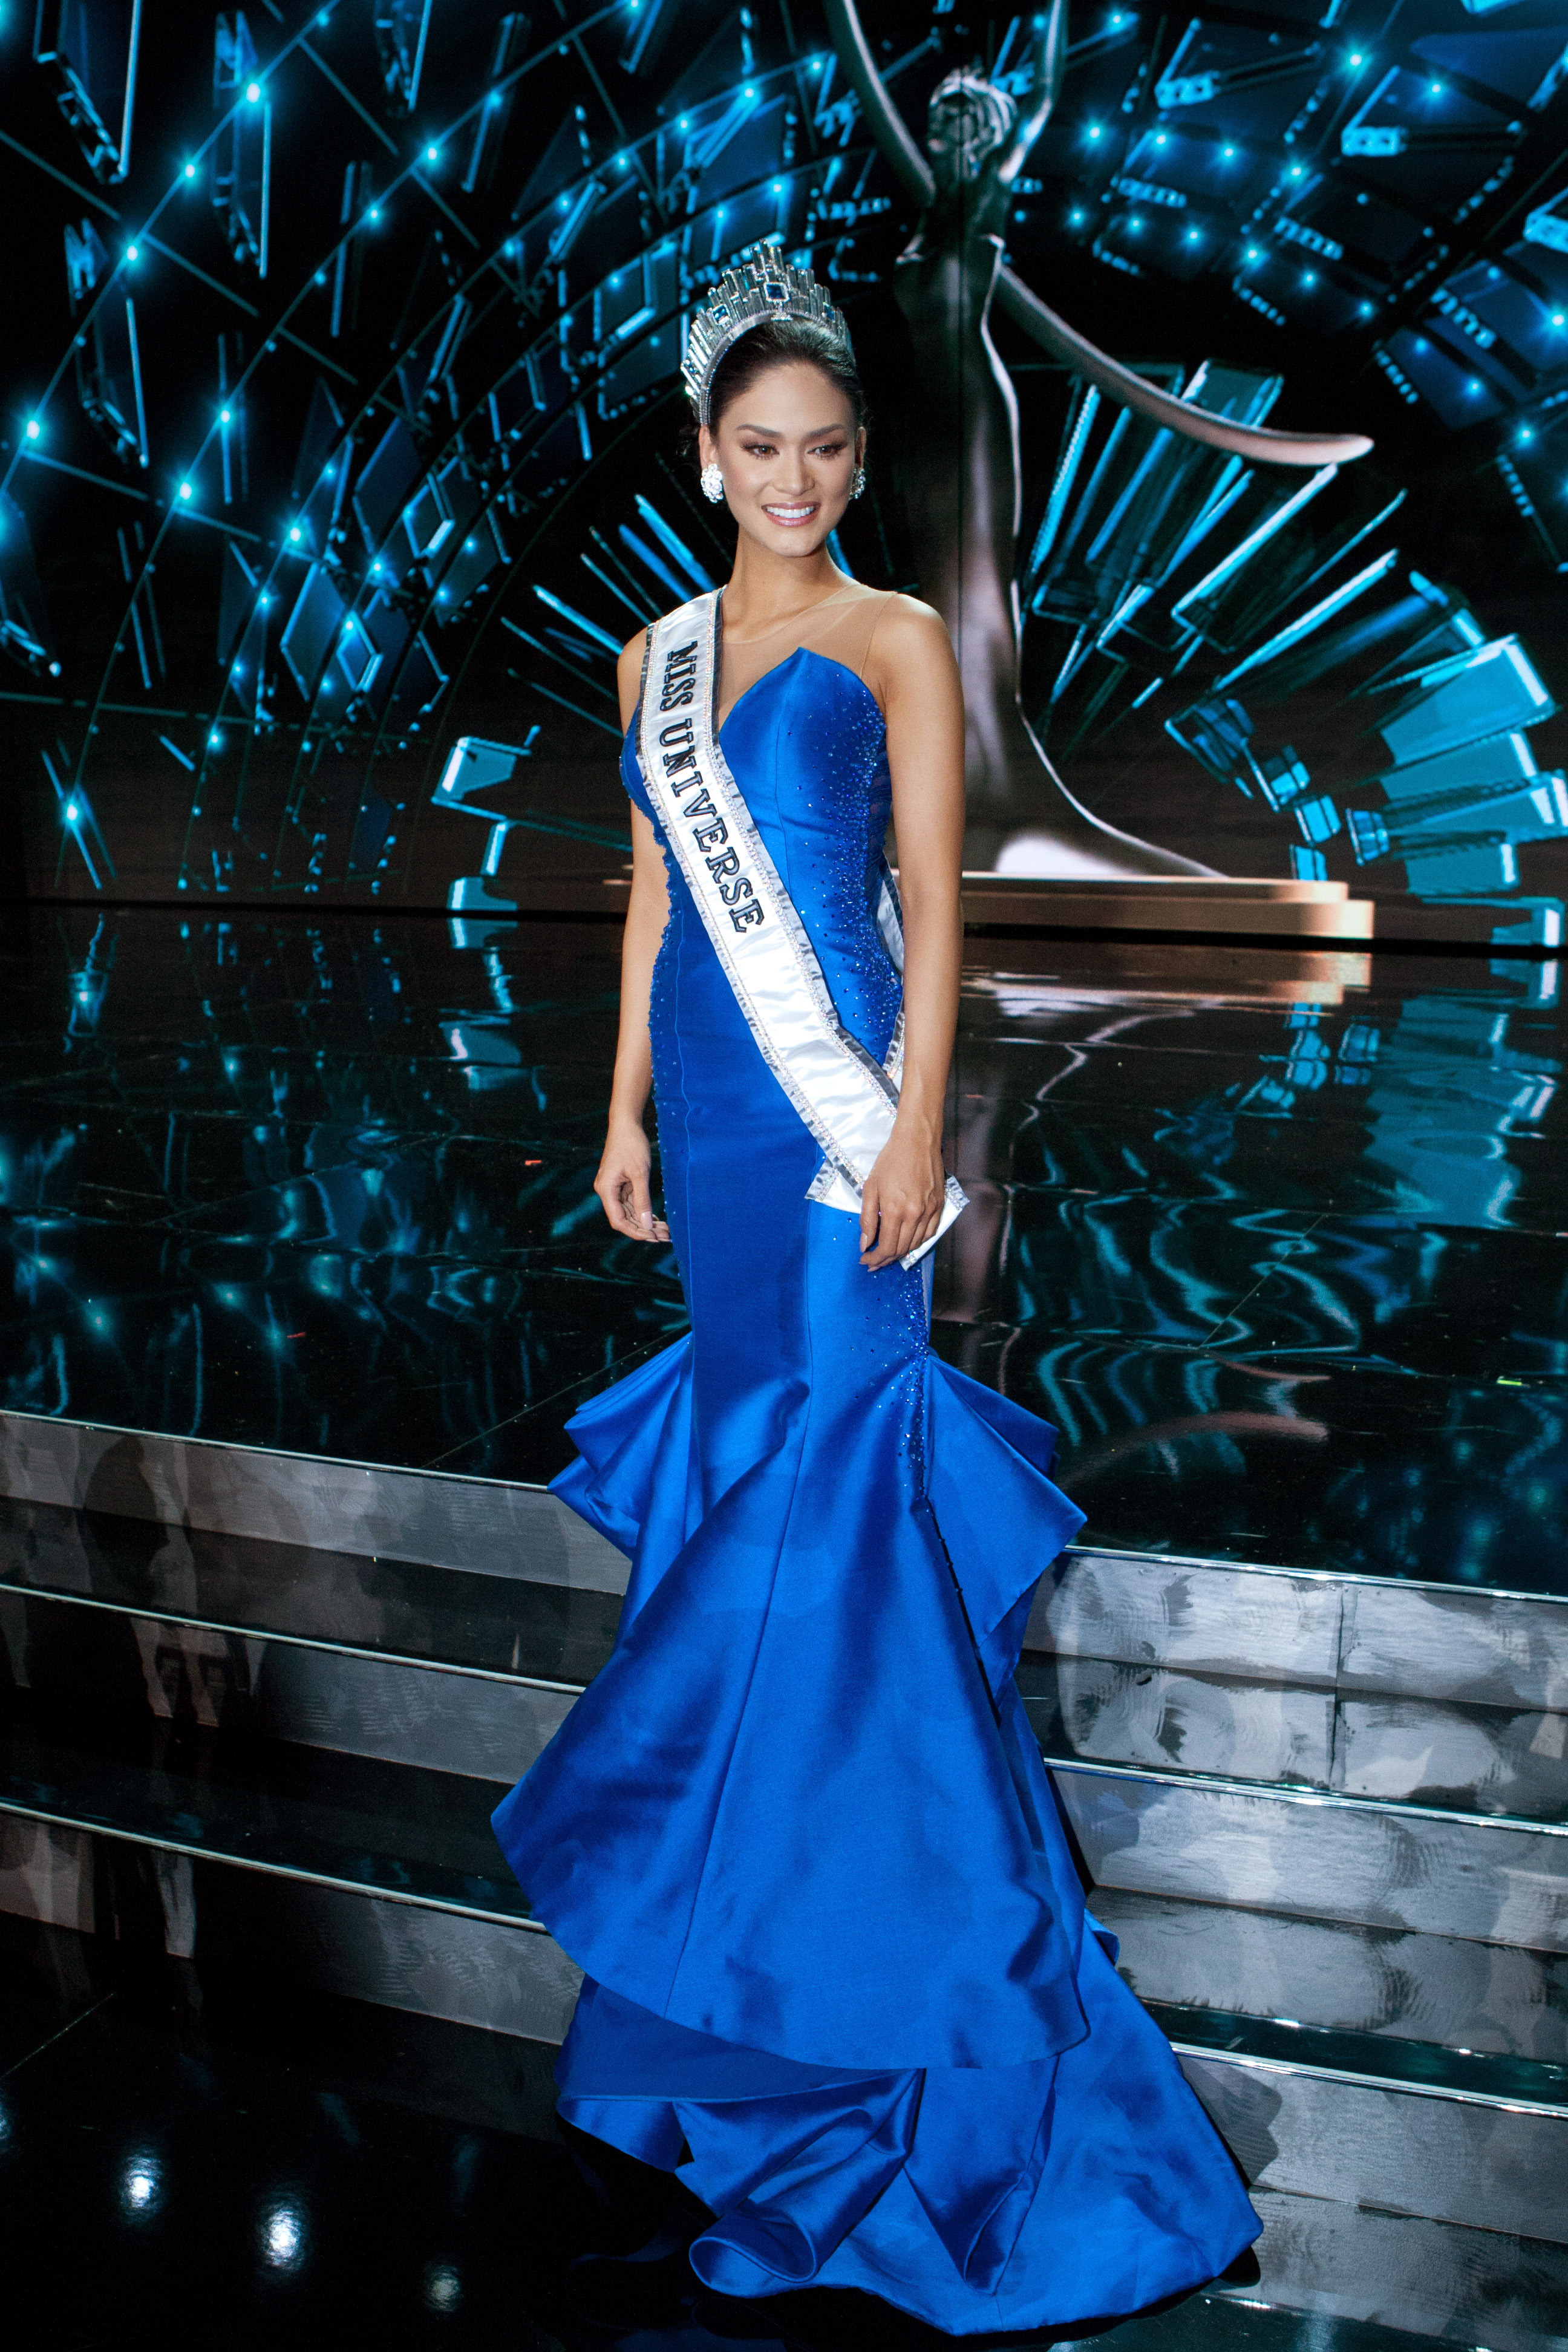 Lava-inspired gown completes PH flag colors on Miss Universe stage